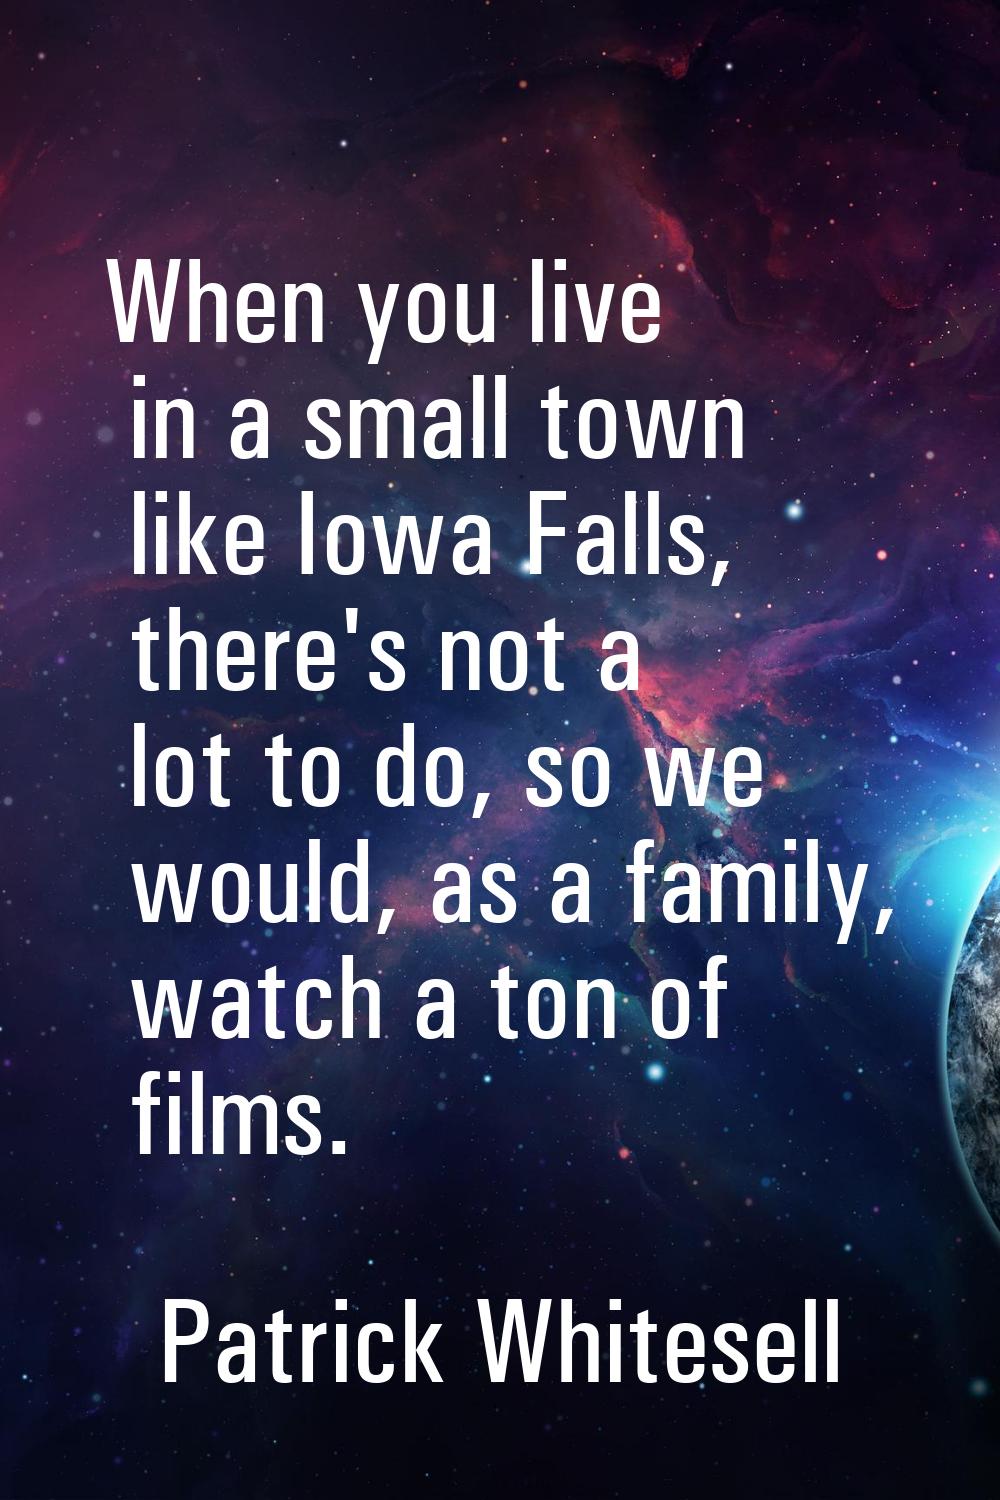 When you live in a small town like Iowa Falls, there's not a lot to do, so we would, as a family, w